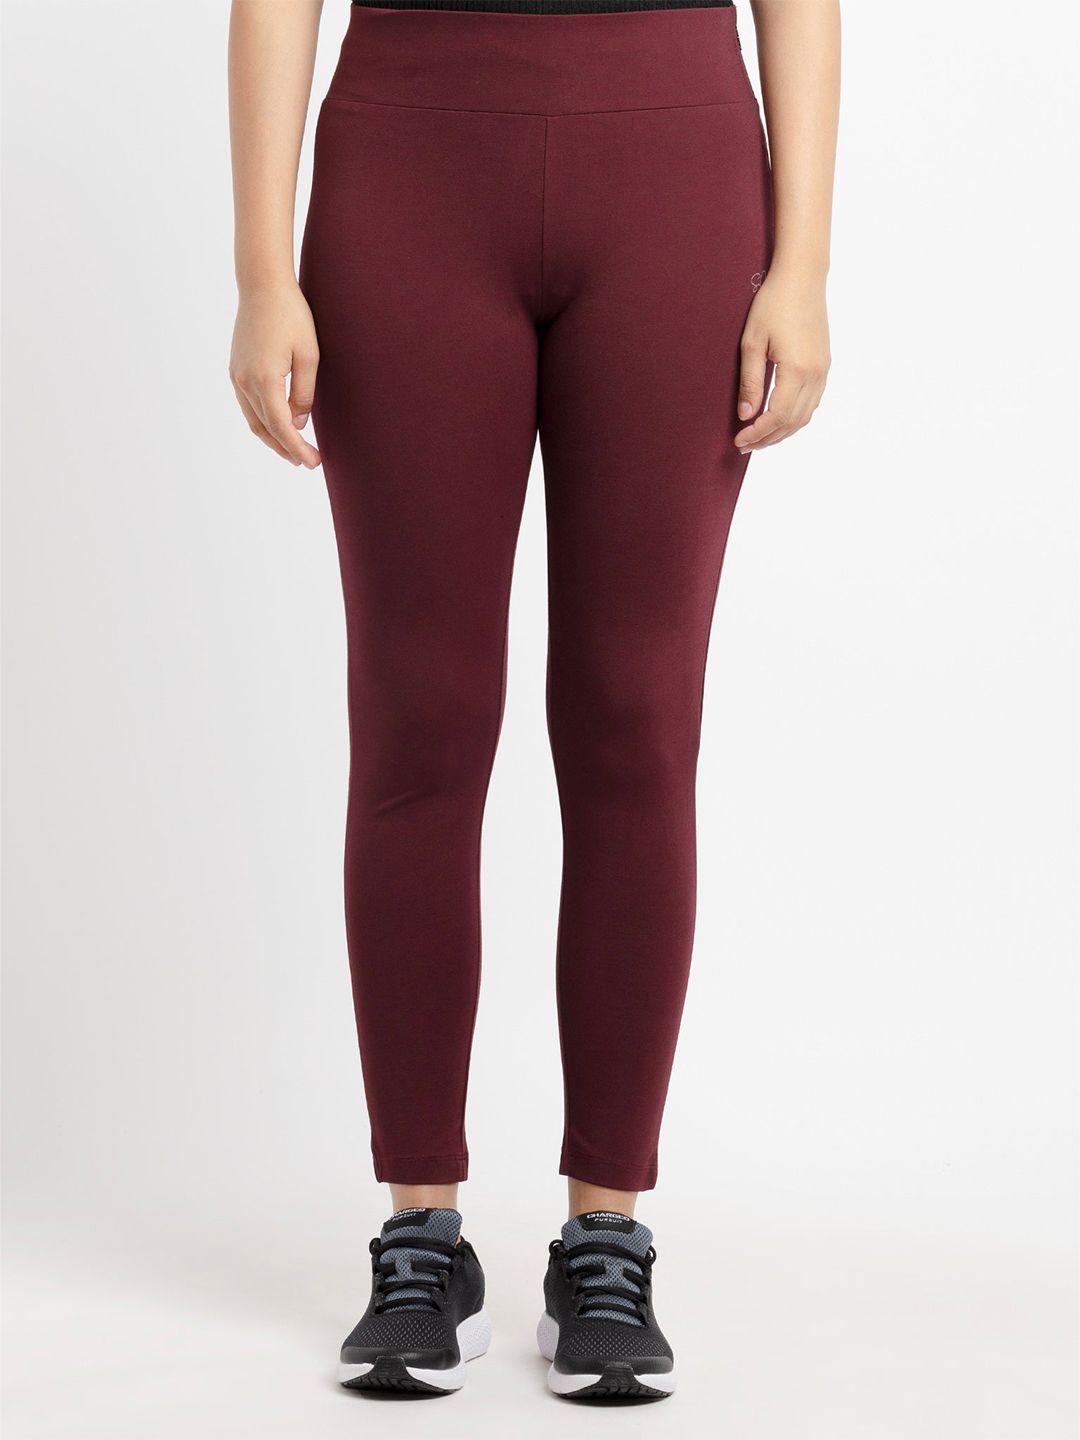 status quo women maroon solid high rise jeggings